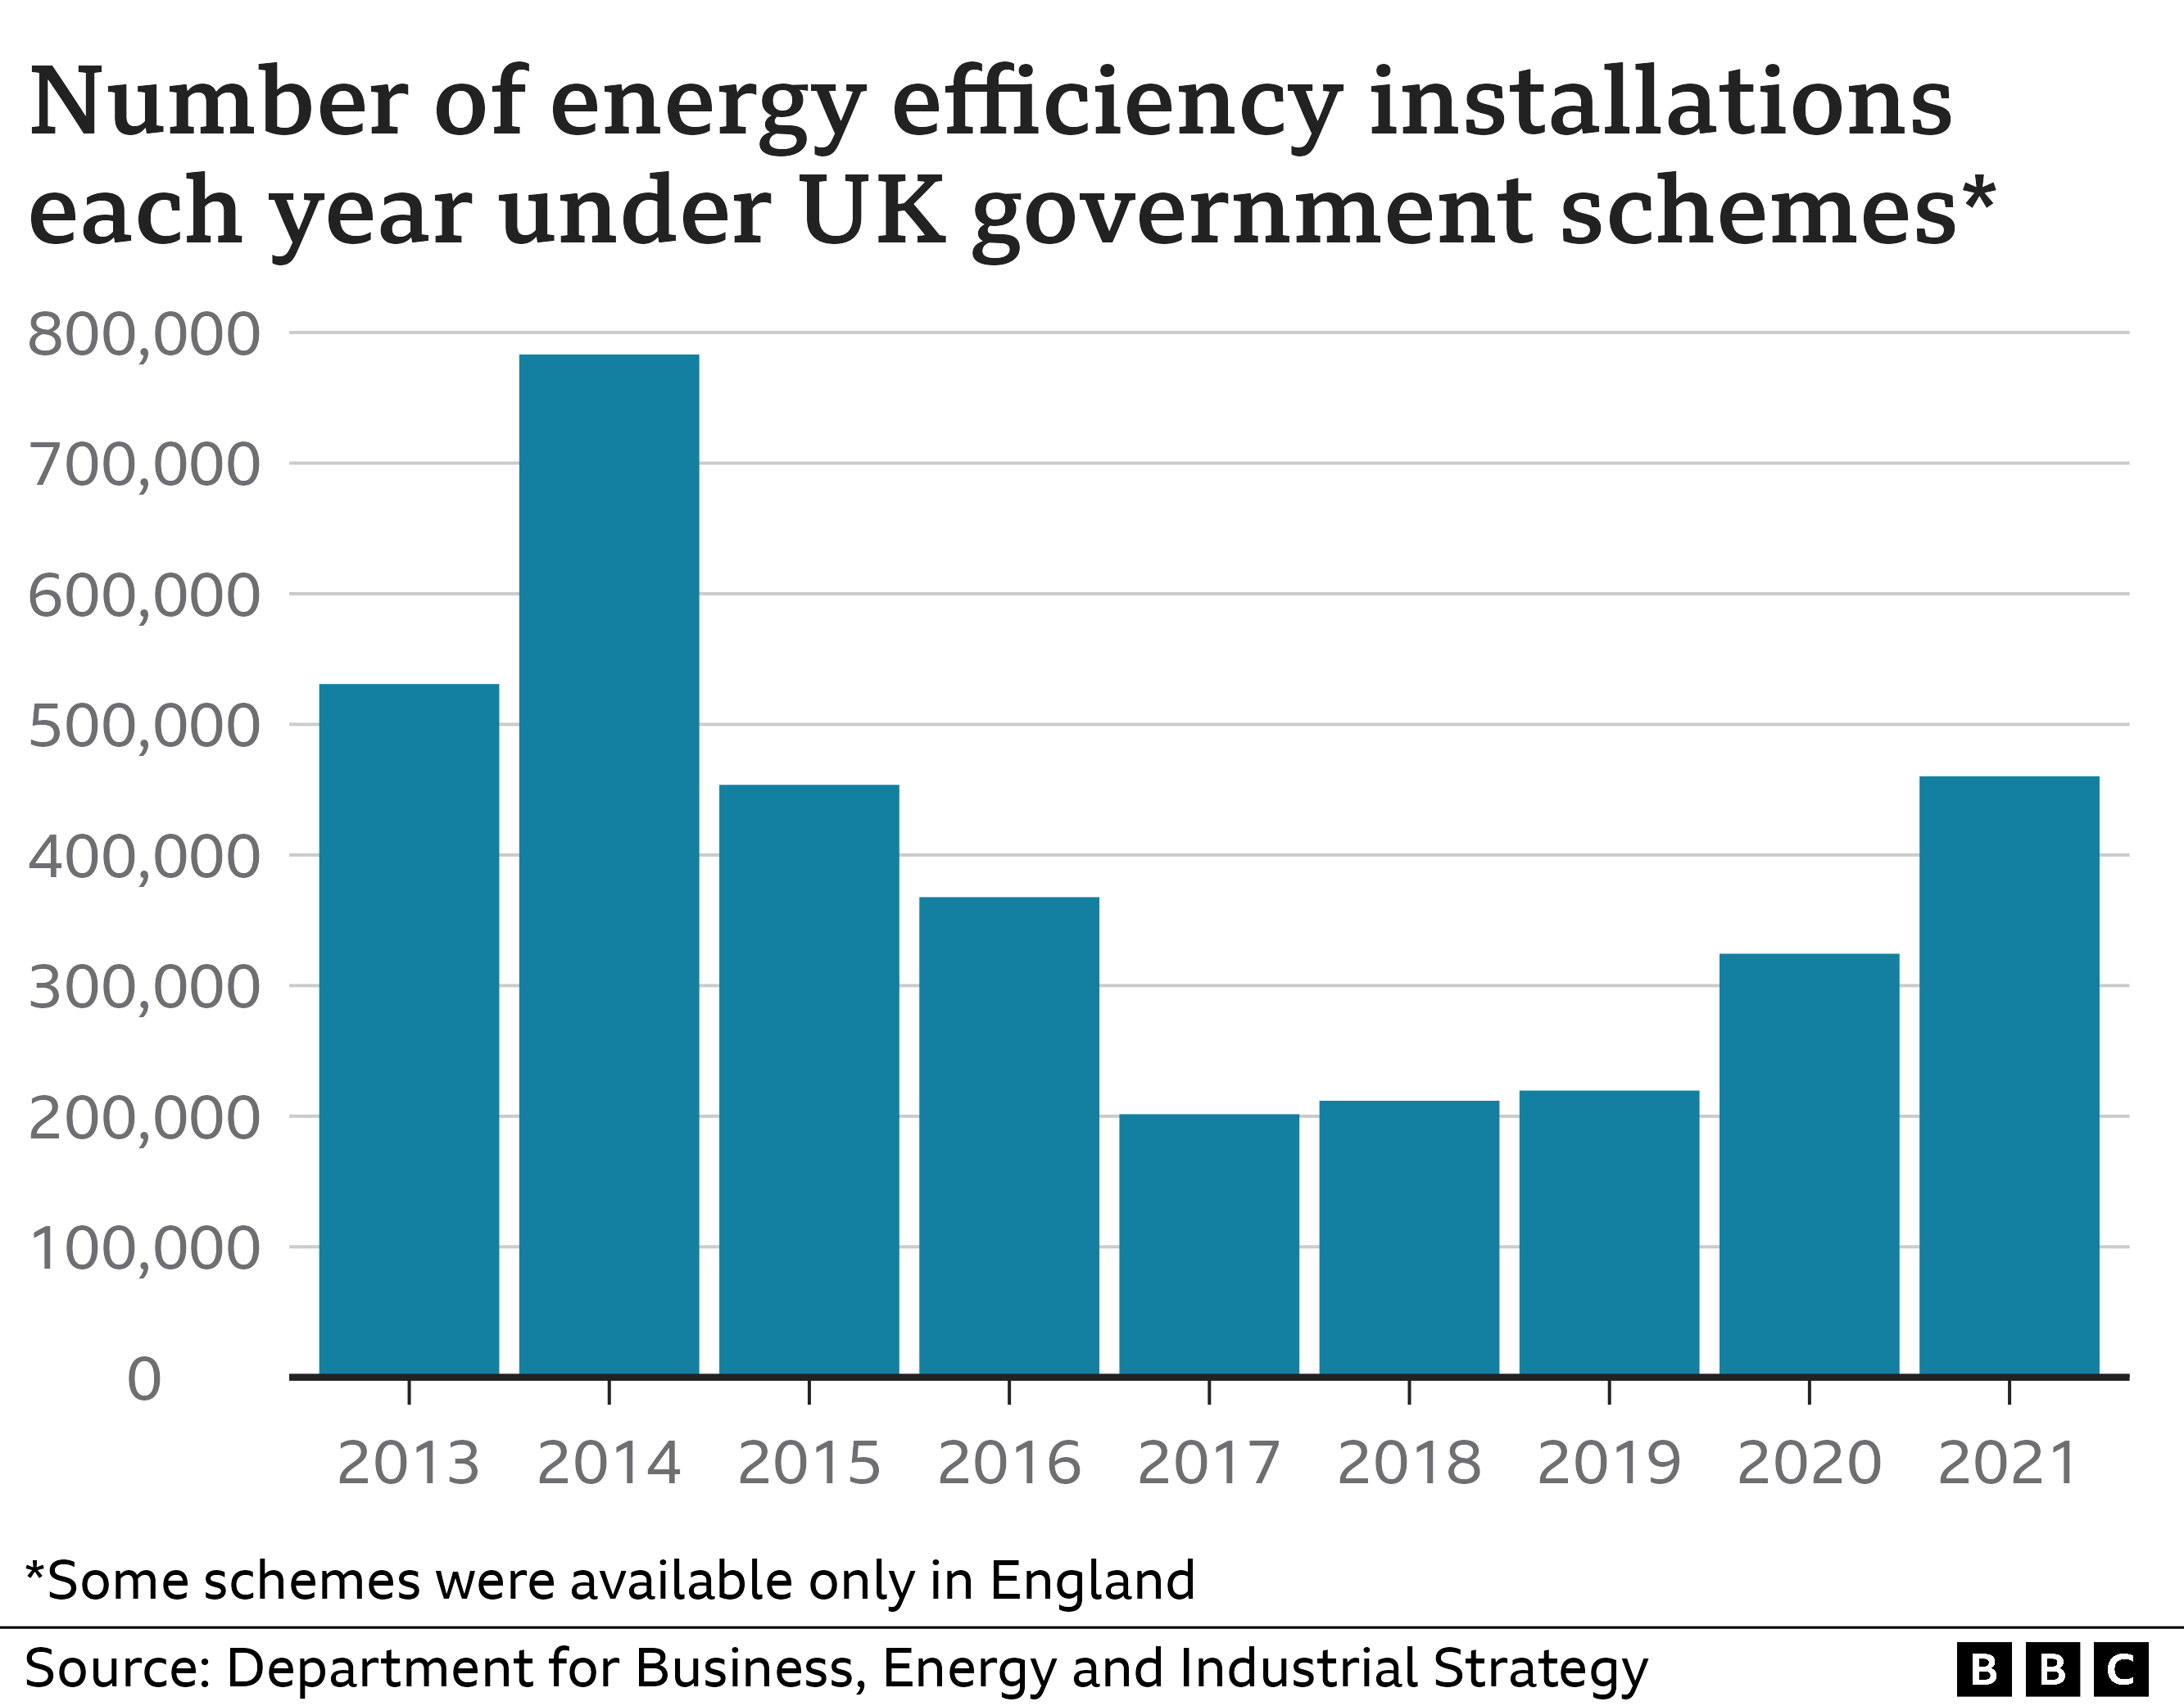 The number of energy efficiency installations since 2013